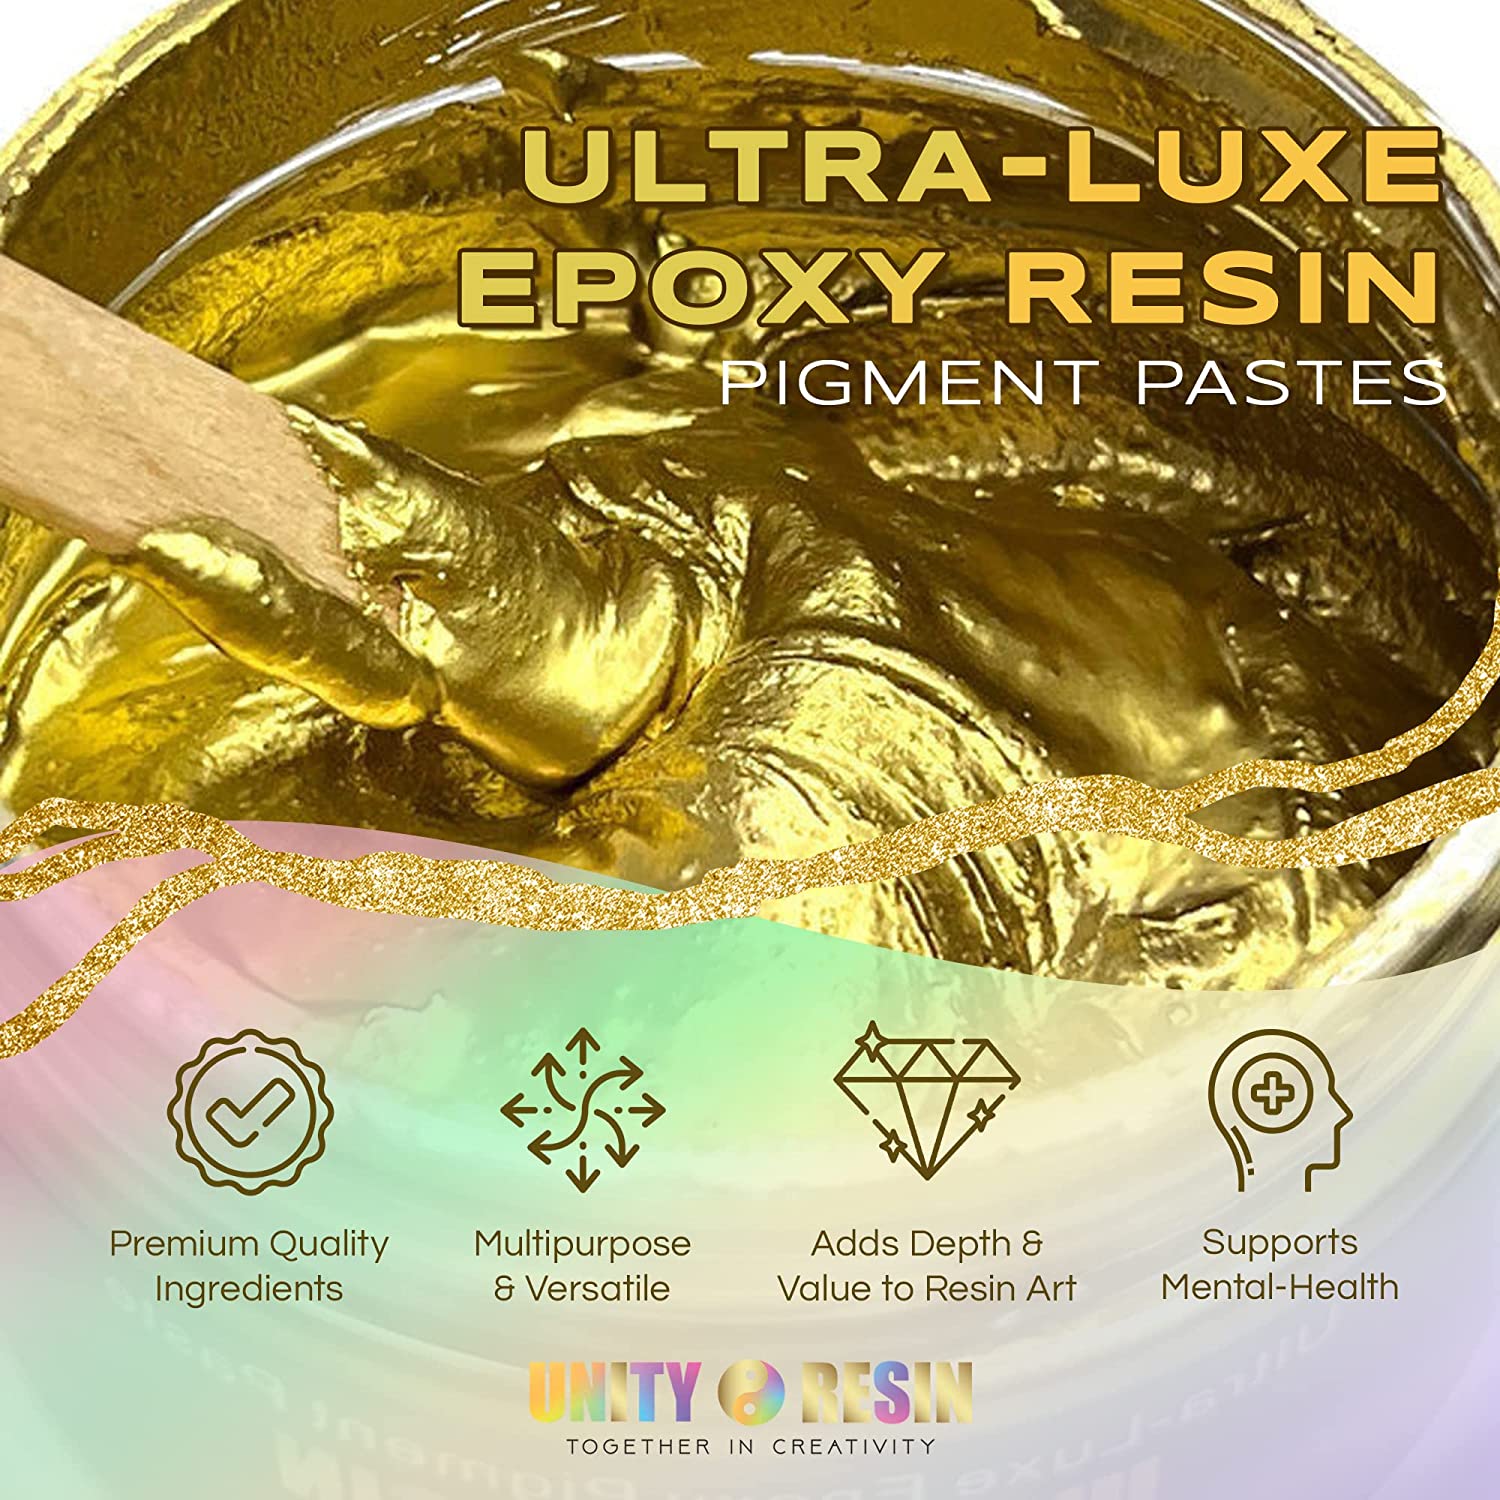 Ultra Luxe' Epoxy Pigment Paste-extravagant GOLD, Resin Art, Gold